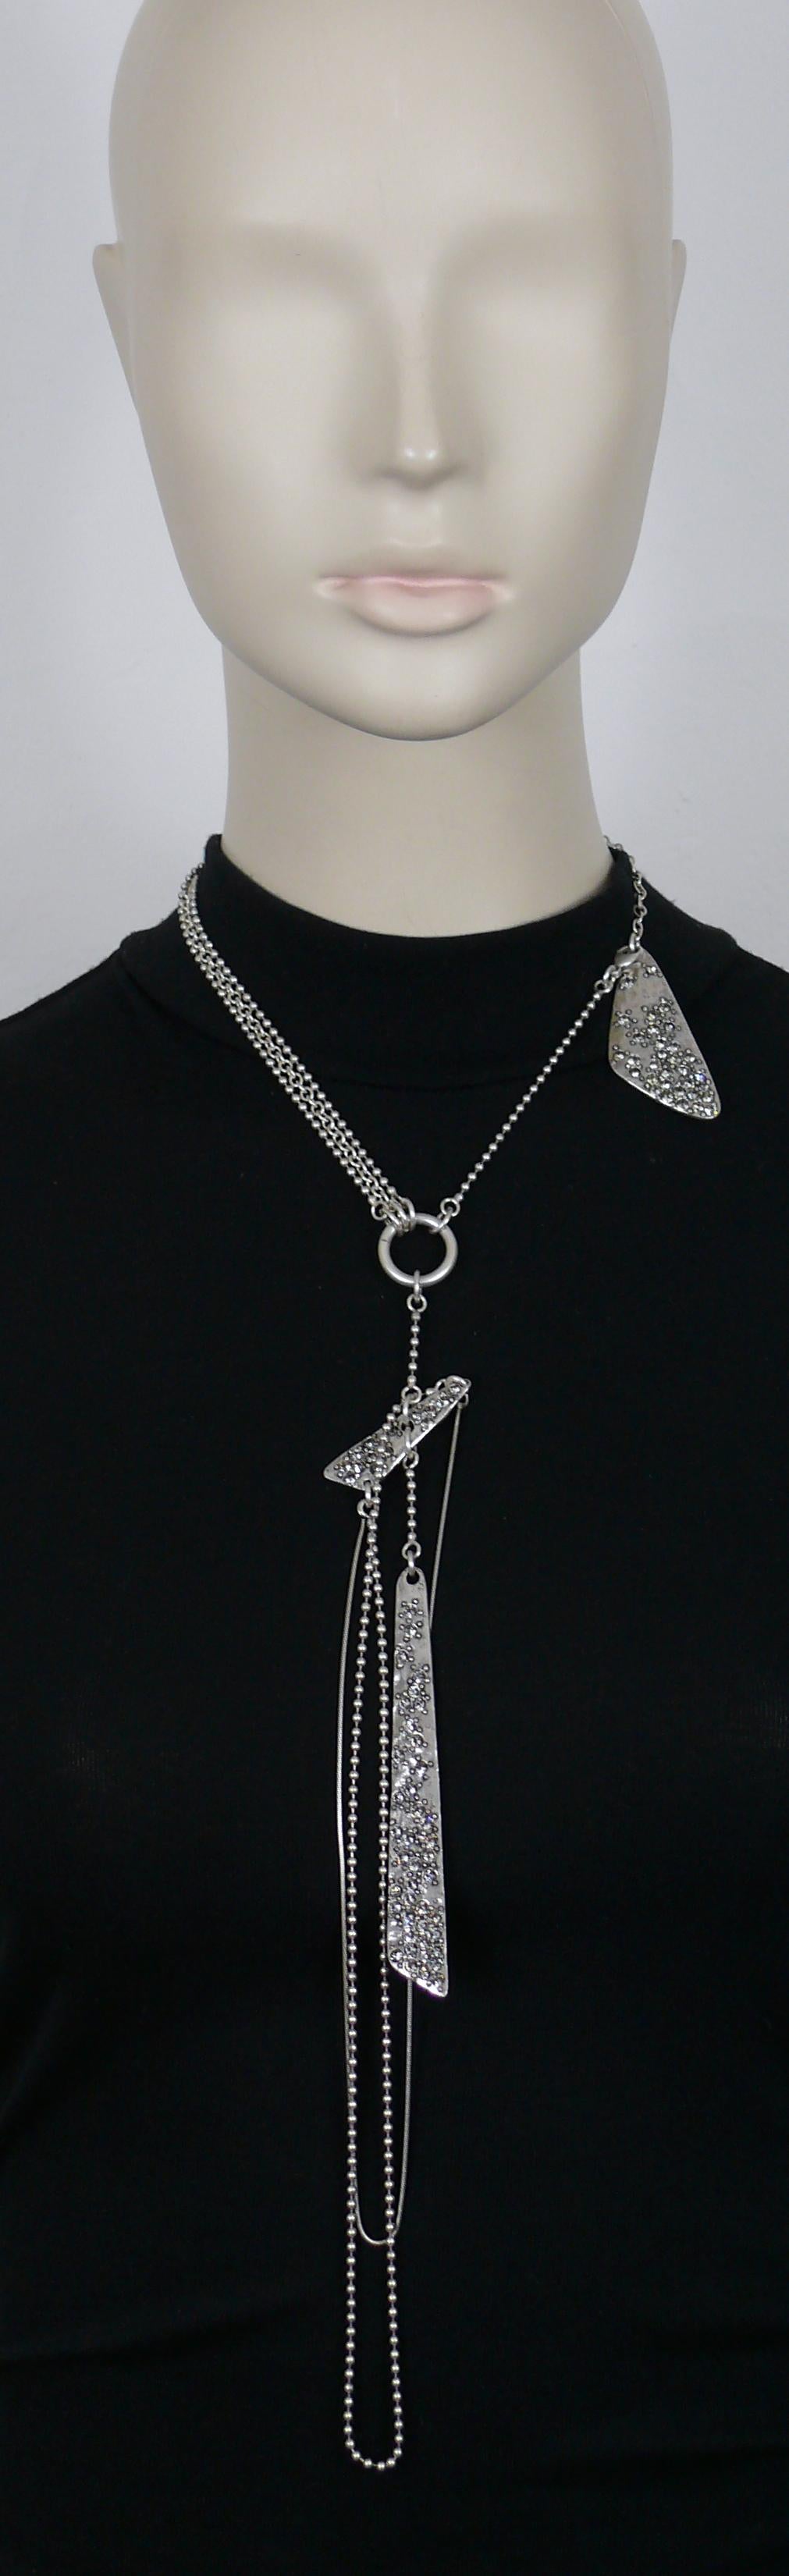 JEAN PAUL GAULTIER silver tone mobile pendant necklace embellished with light grey crystals.

Lobster clasp closure.

Marked GAULTIER.

Indicative measurements : height approx. 48 cm (18.90 inches).

Material : Silver tone metal hardware /